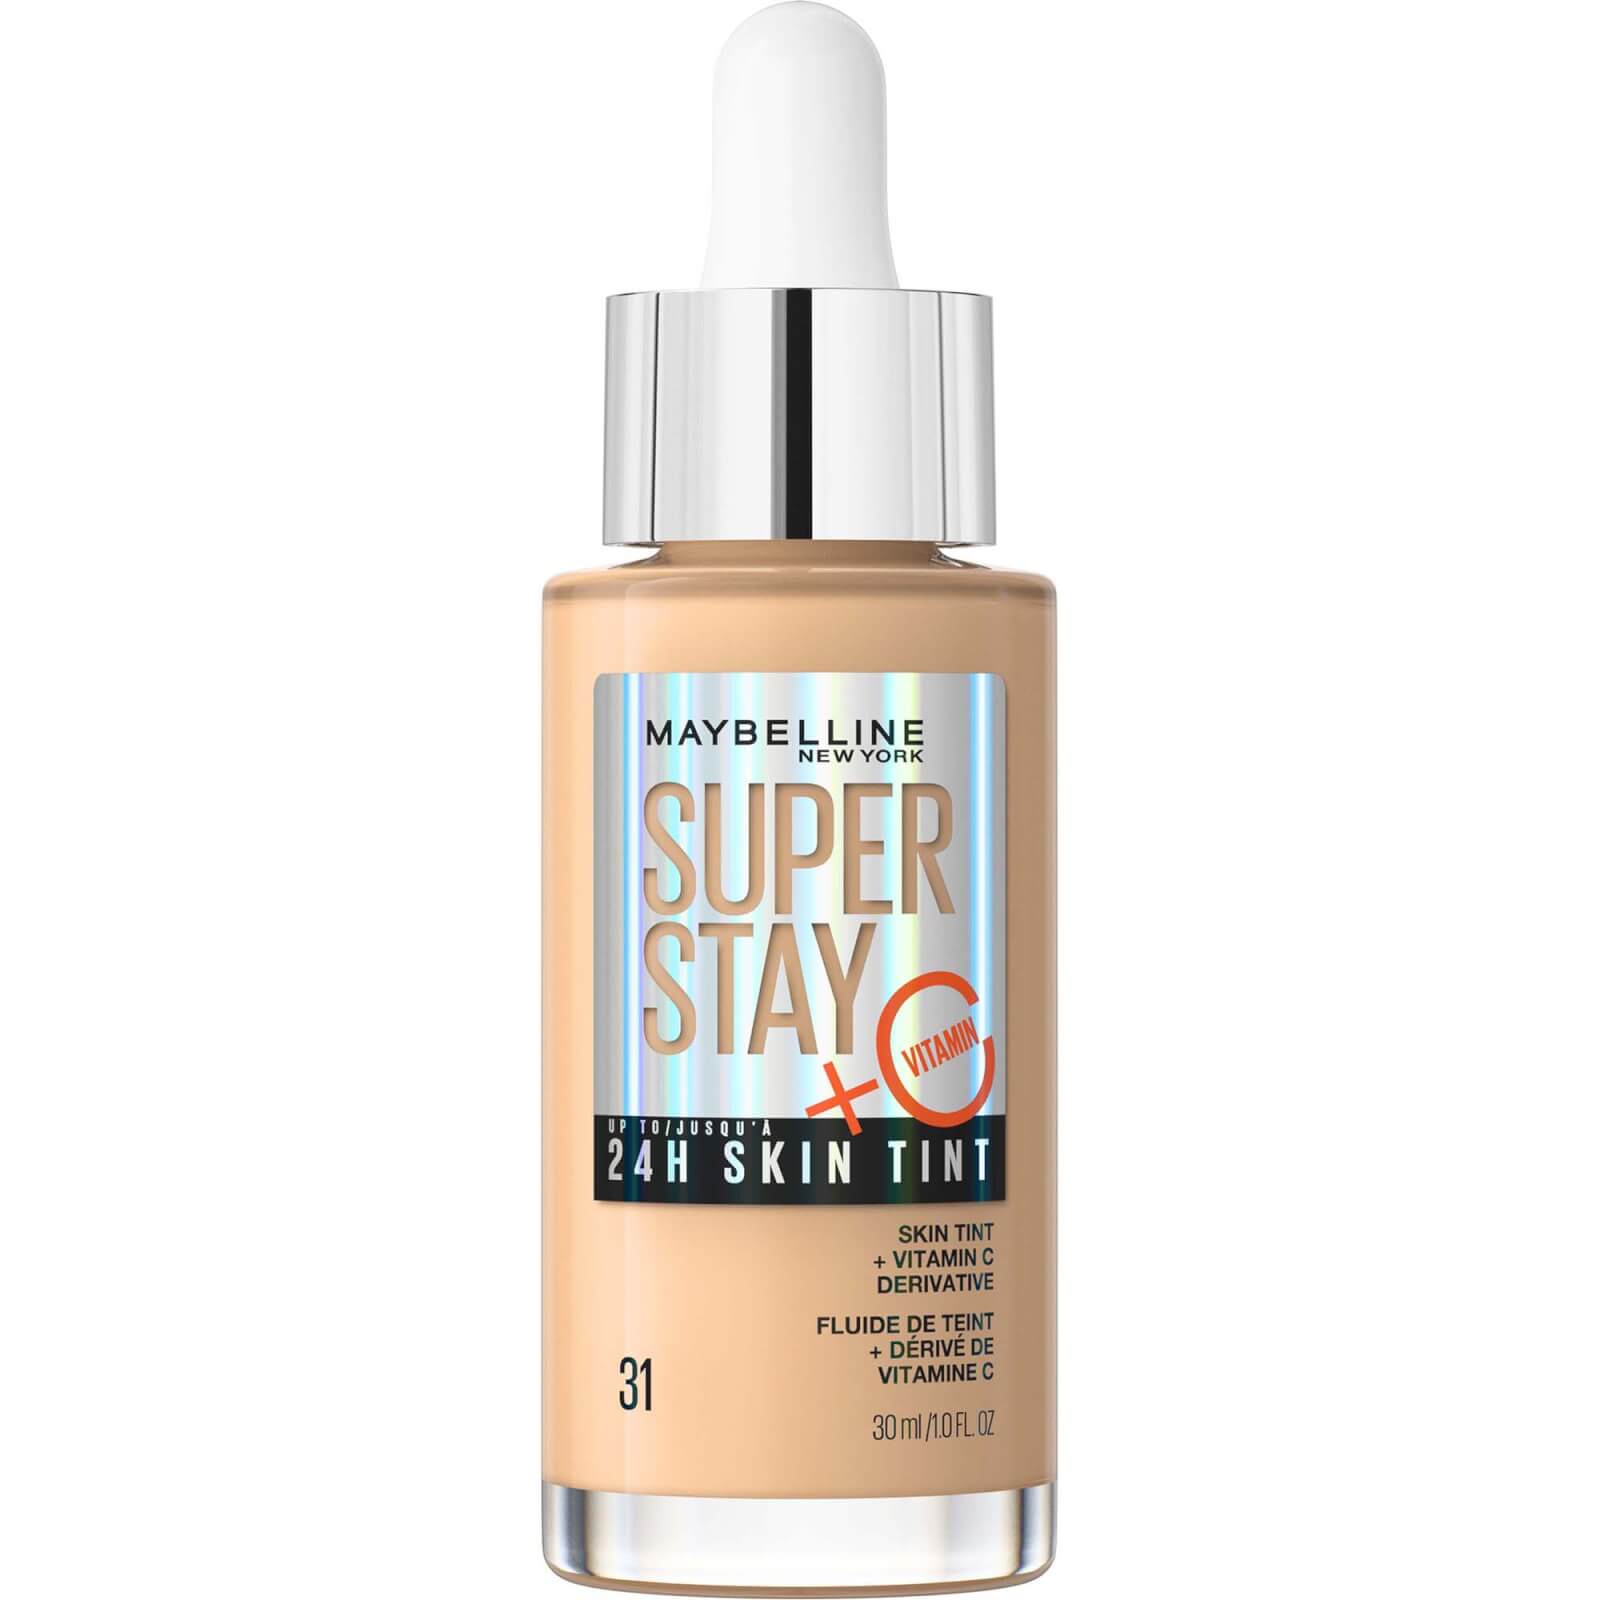 Maybelline Super Stay up to 24H Skin Tint Foundation + Vitamin C 30ml (Various Shades) - 31